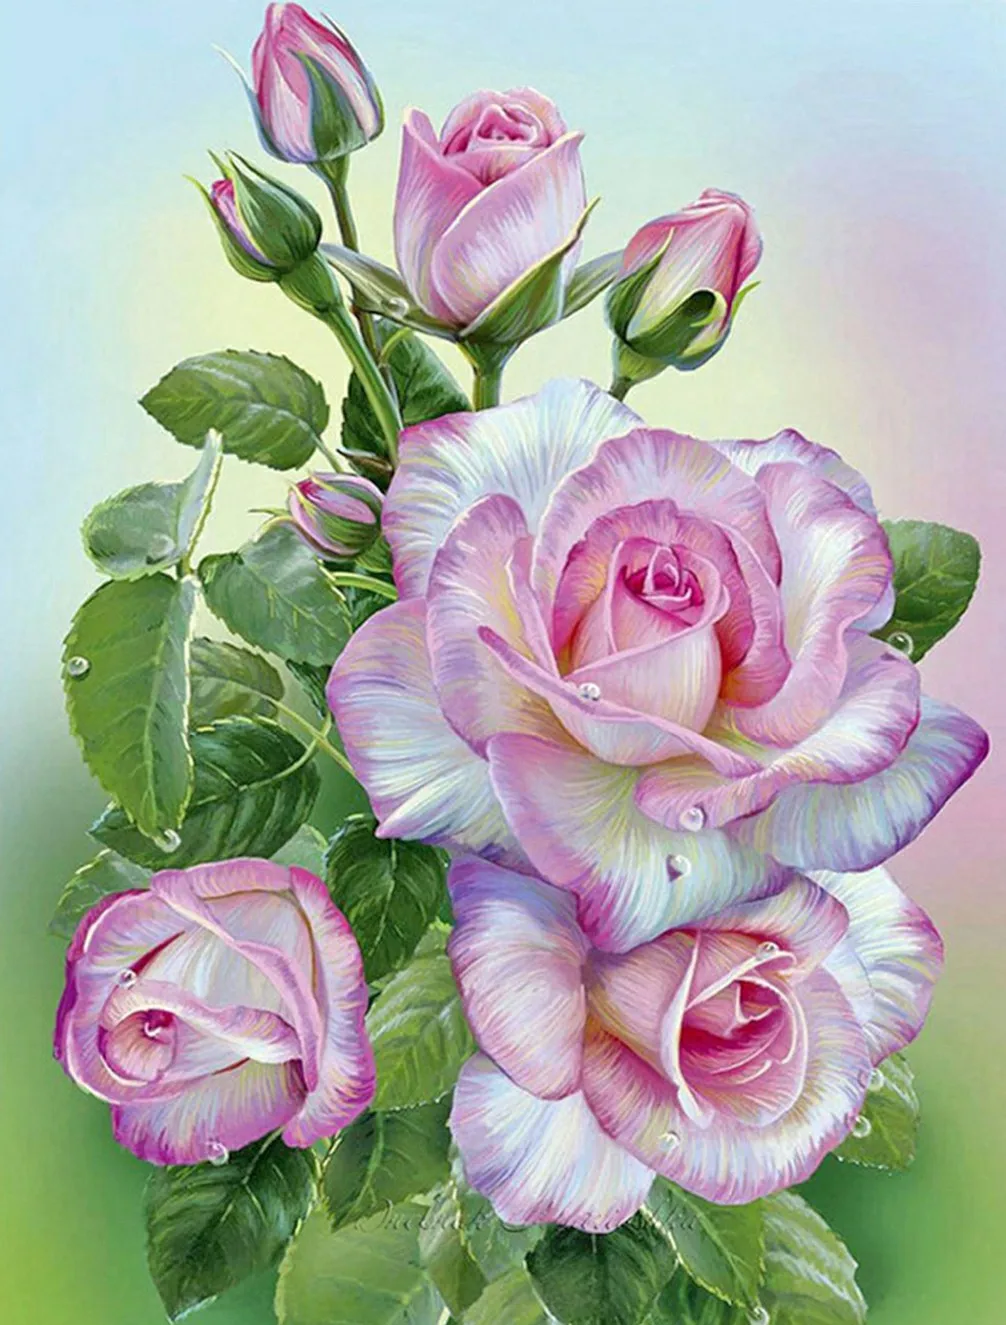 5D DIY Diamond Painting Rose Flowers Vase Cross Stitch Kit Full Drill Embroidery Mosaic Art Picture Of Rhinestones Home Decor 